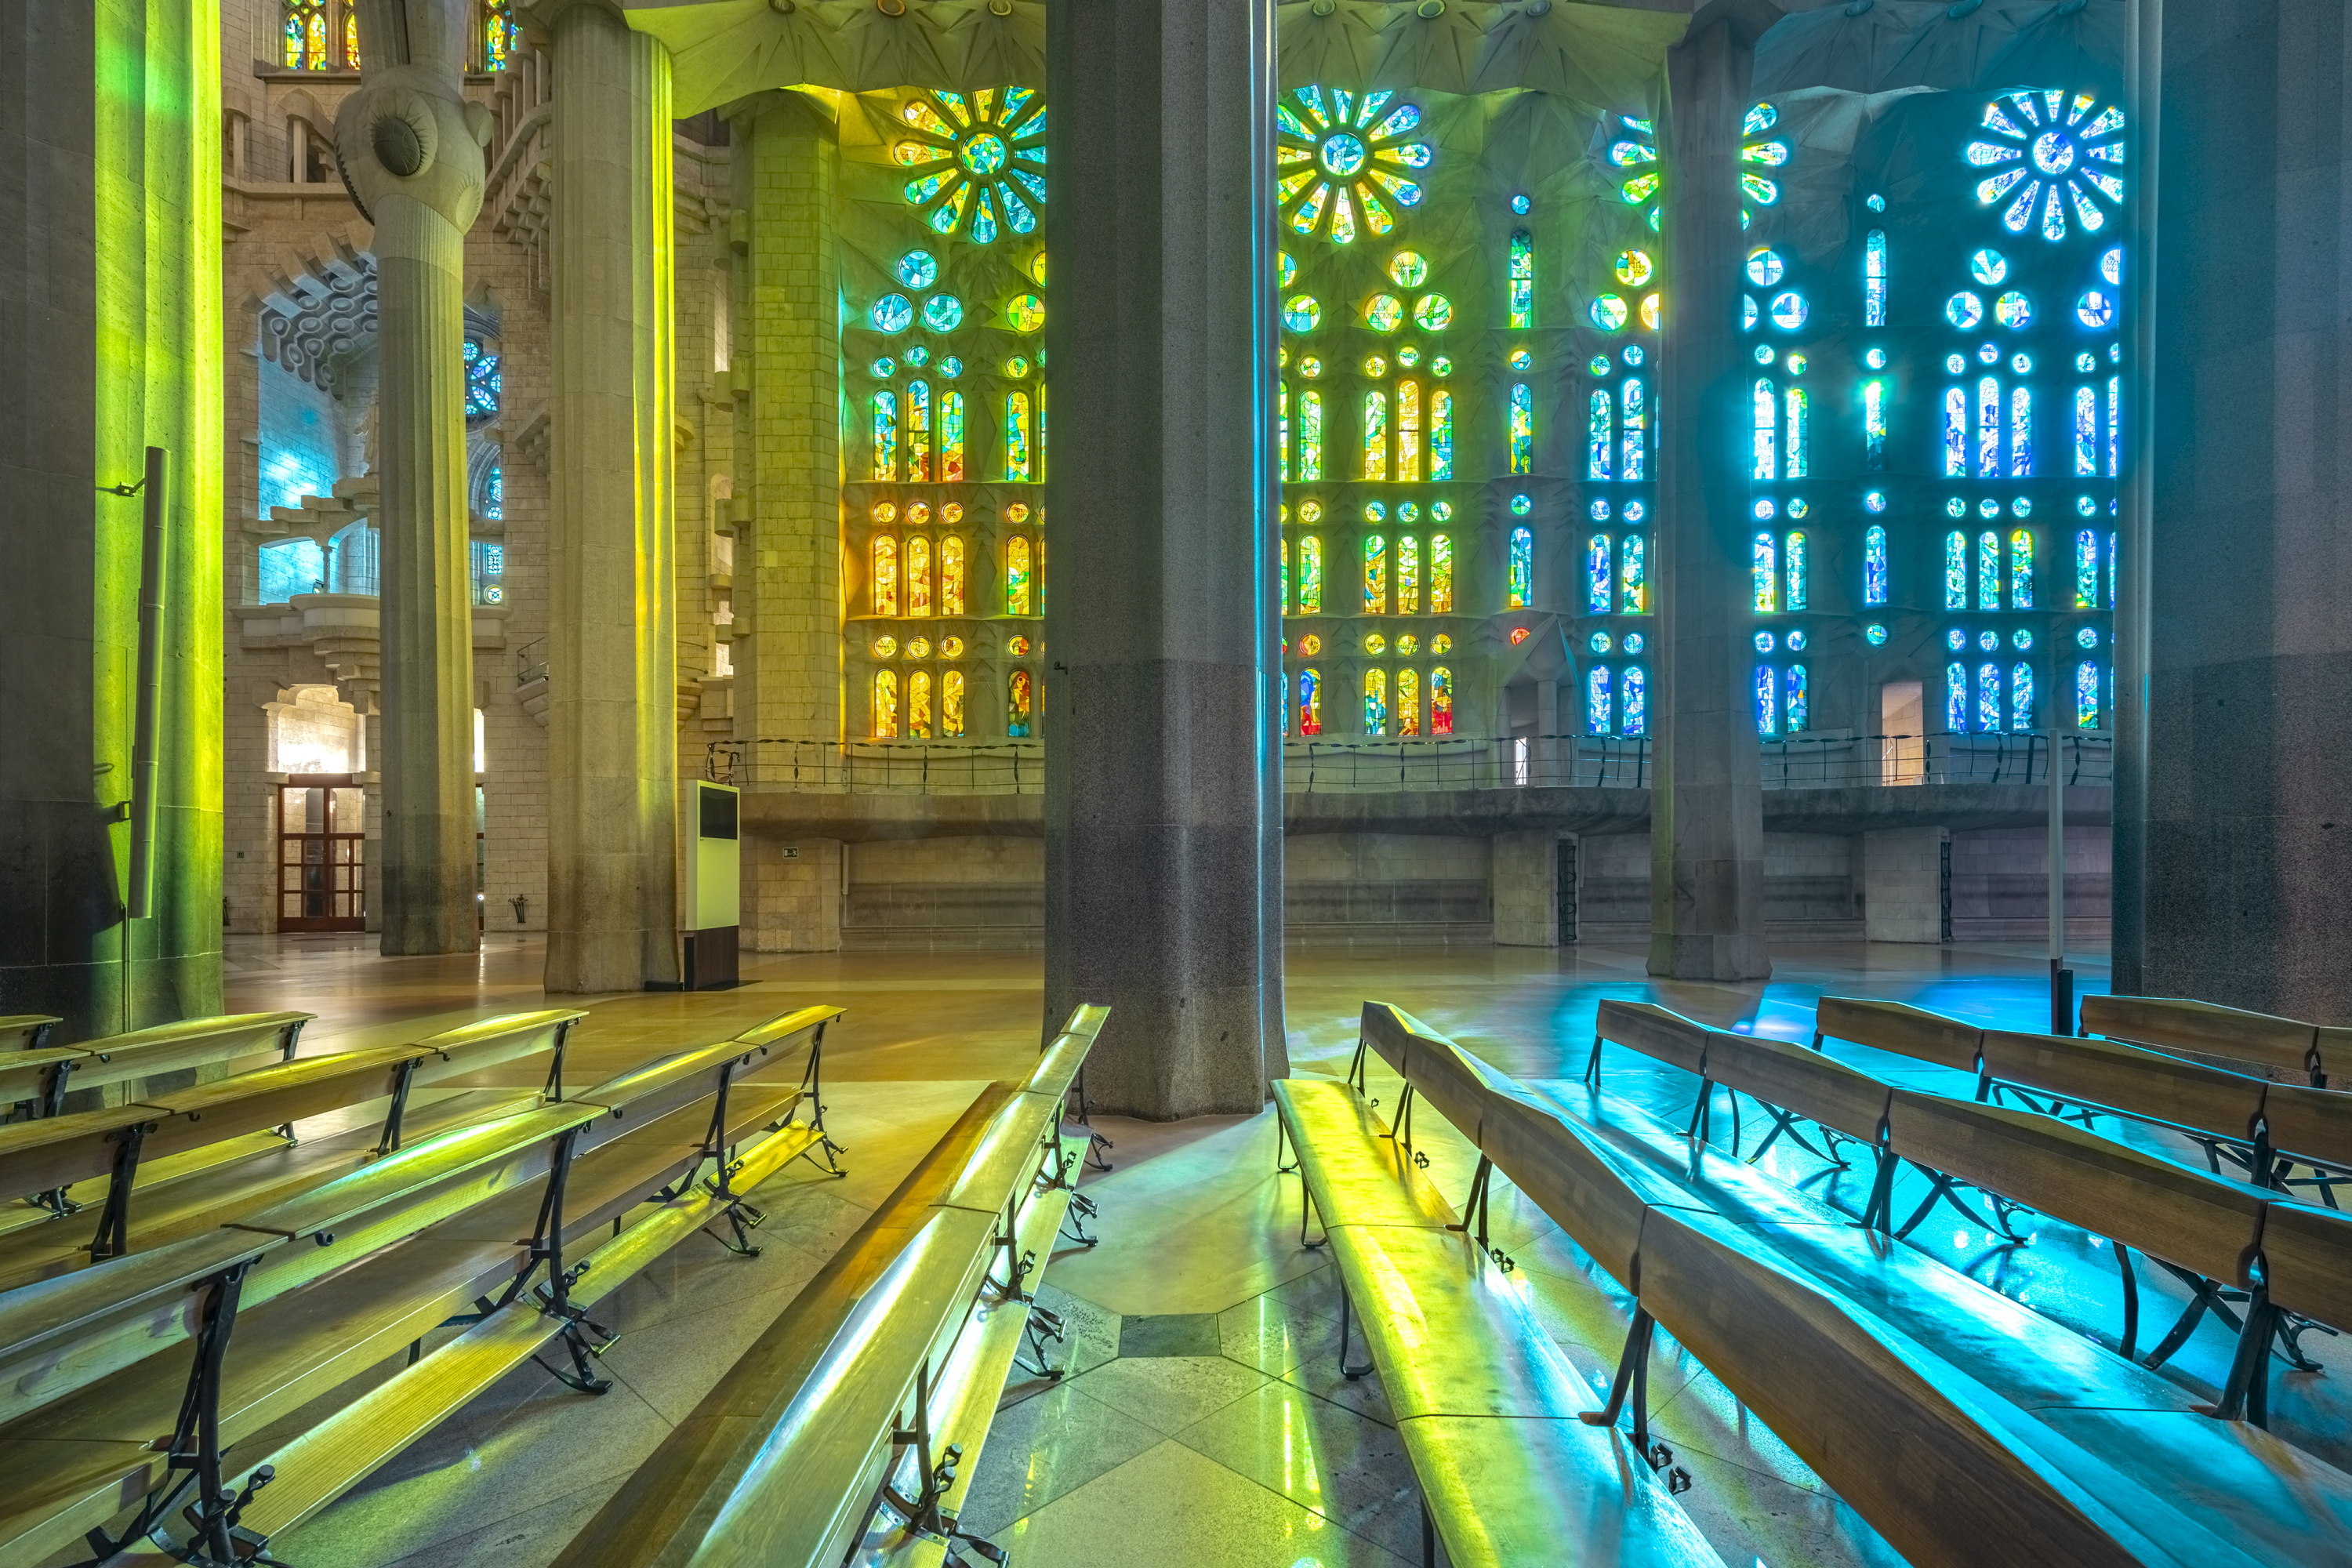 The windows on the Nativity façade have bluer tones, corresponding to the morning light